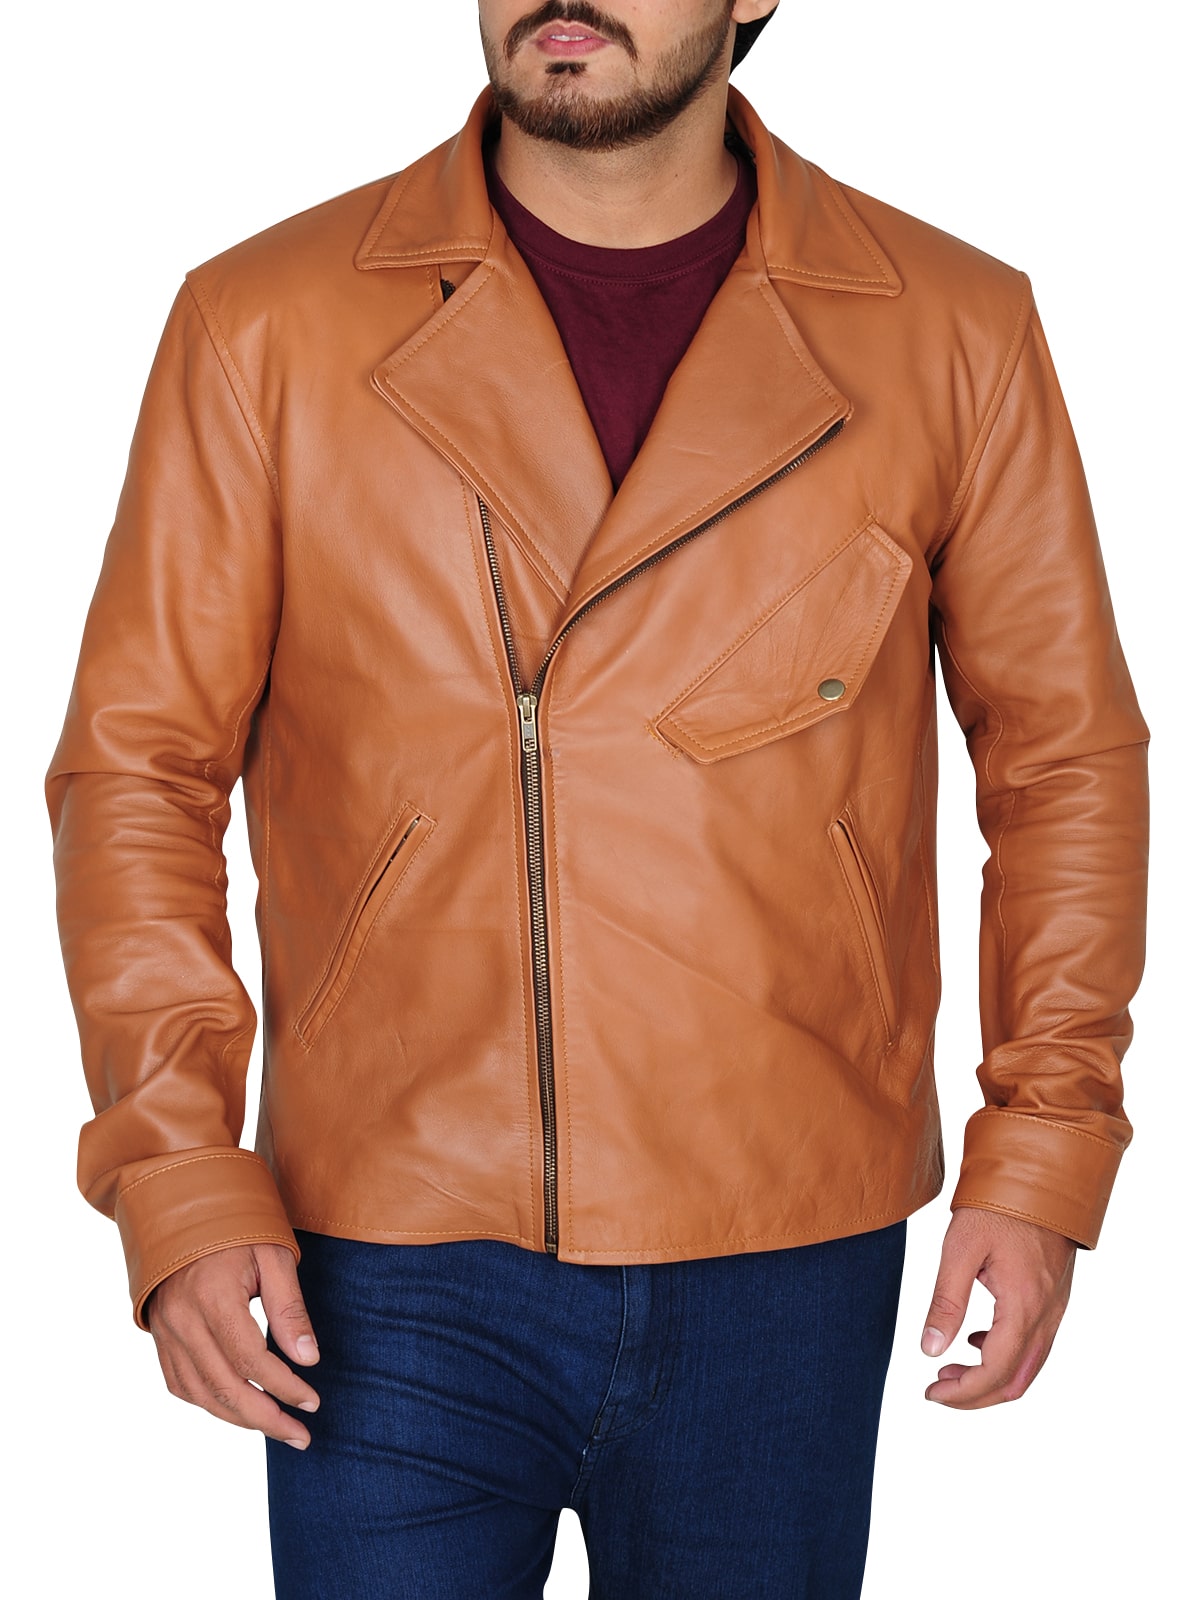 Classy Tawny Brown Leather Jacket